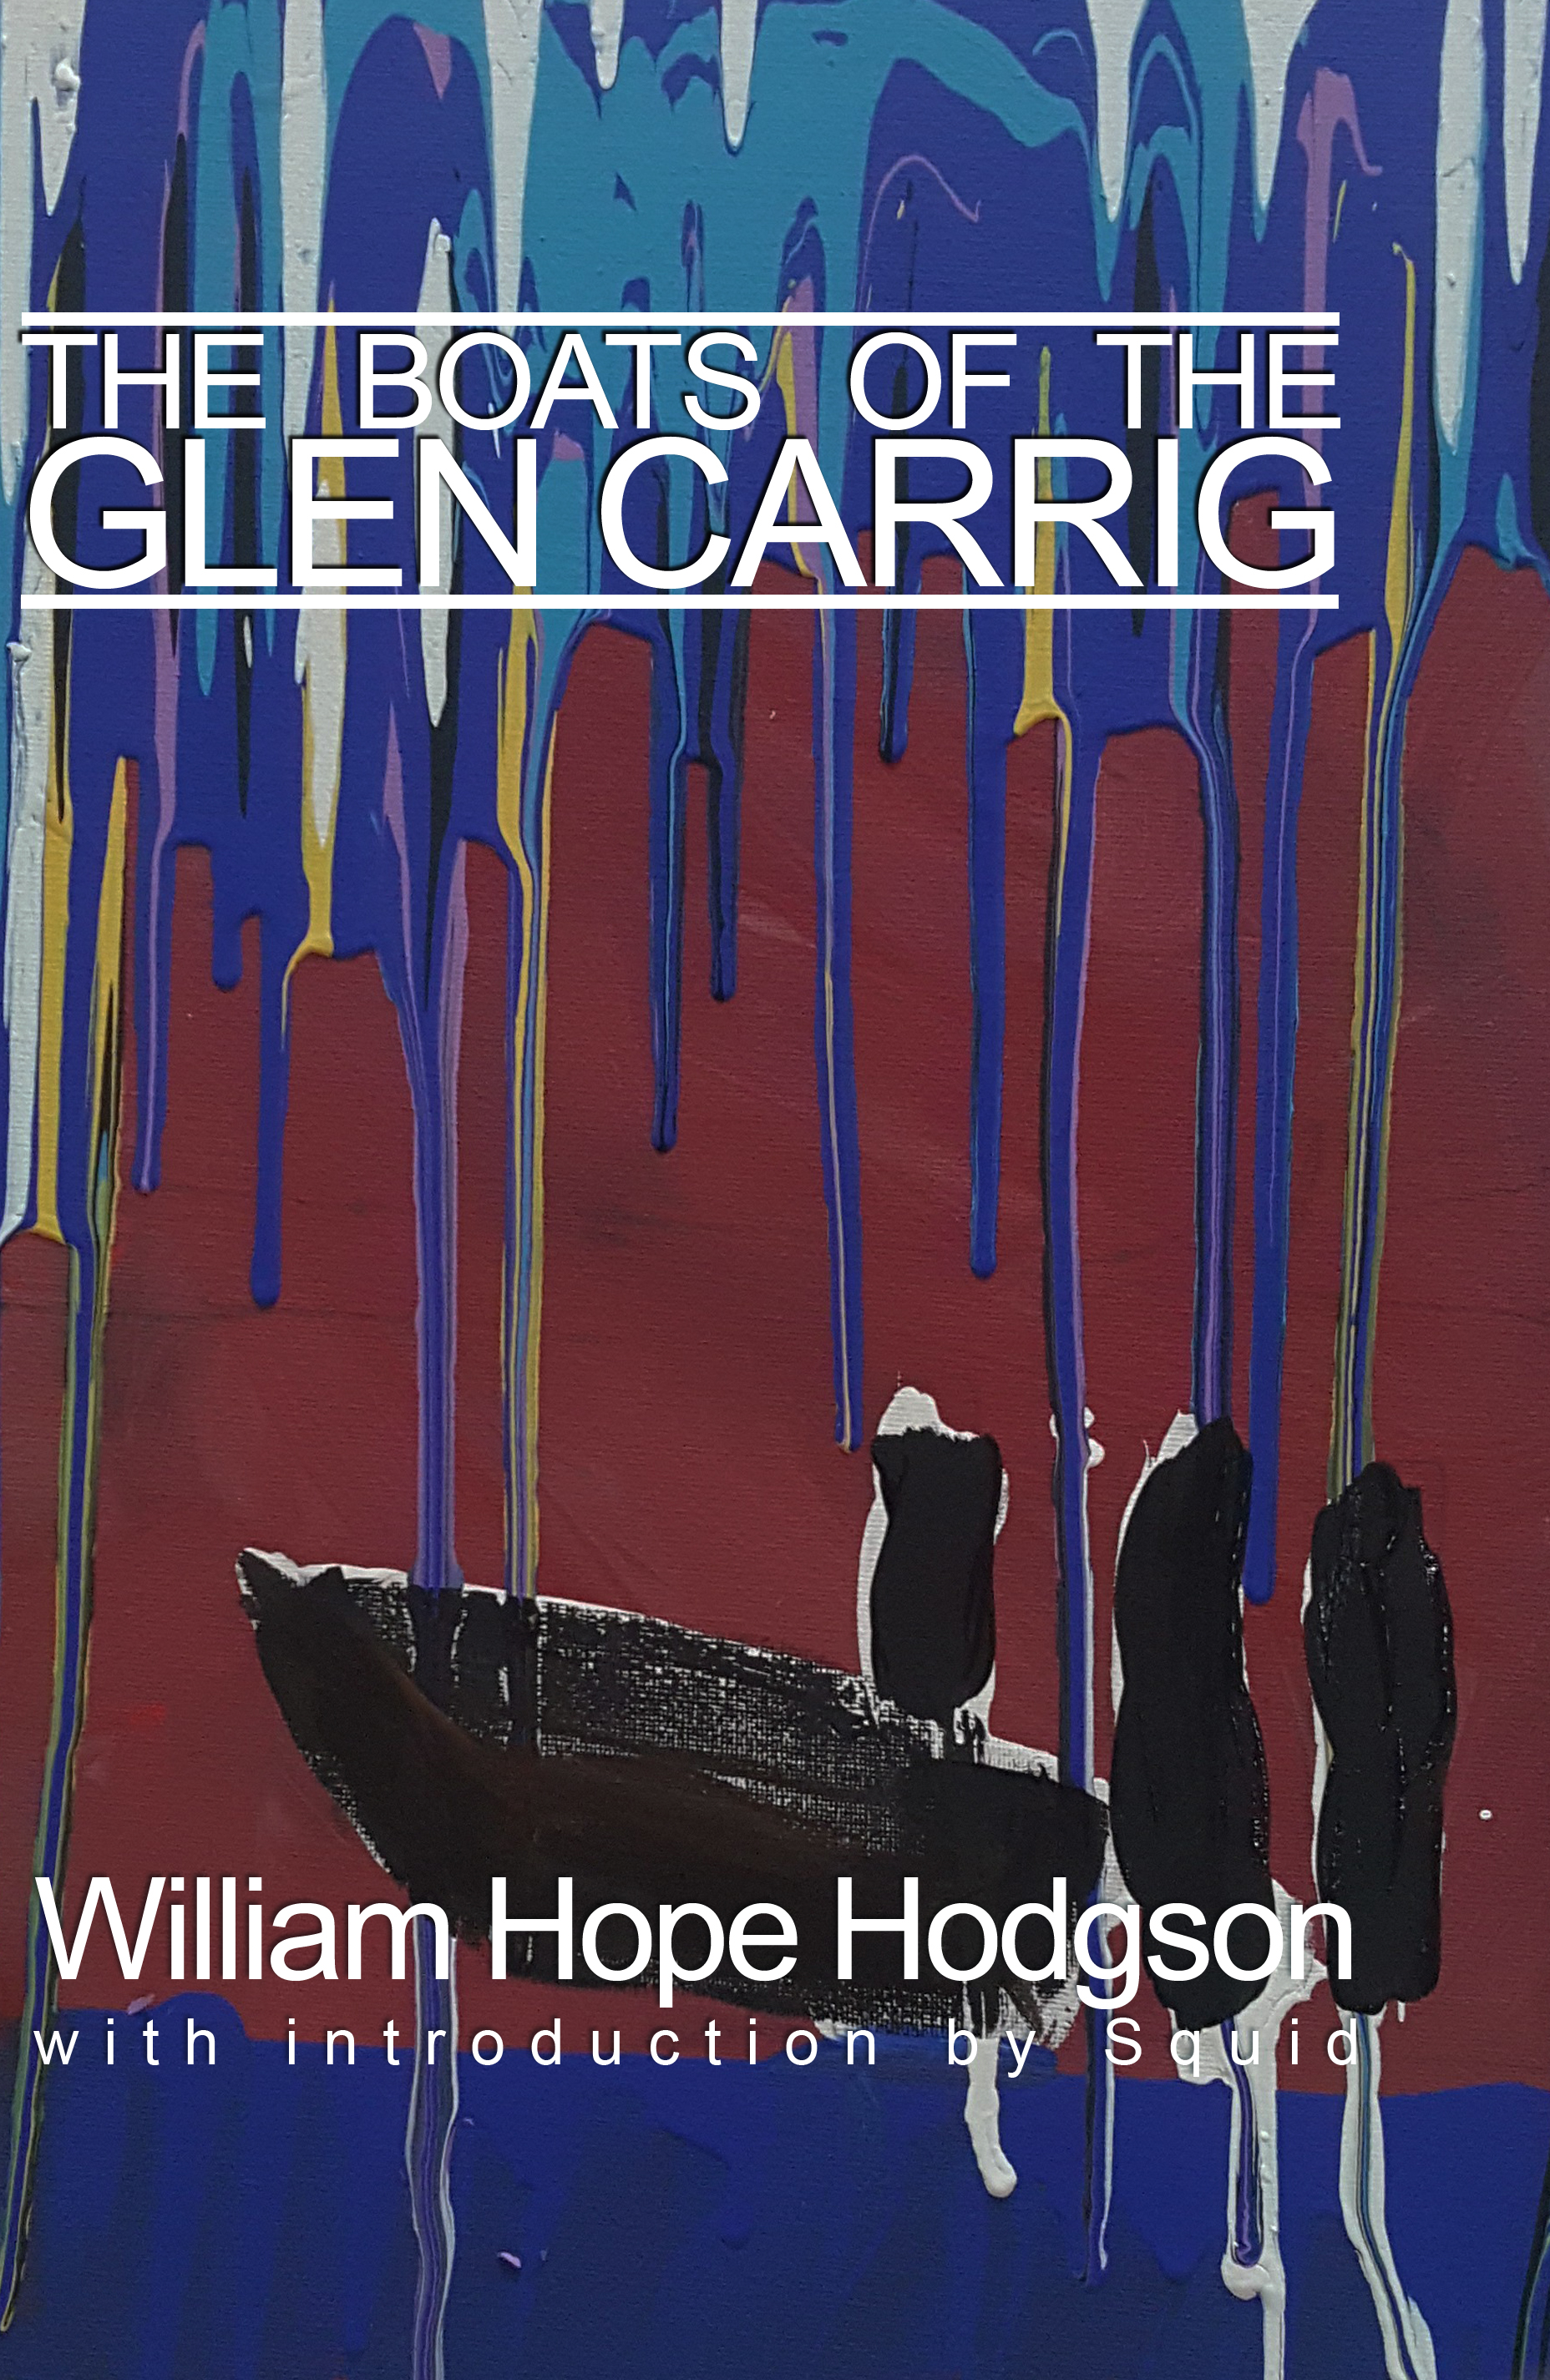 The Boats of Glen Carrig (book) by William Hope Hodgson